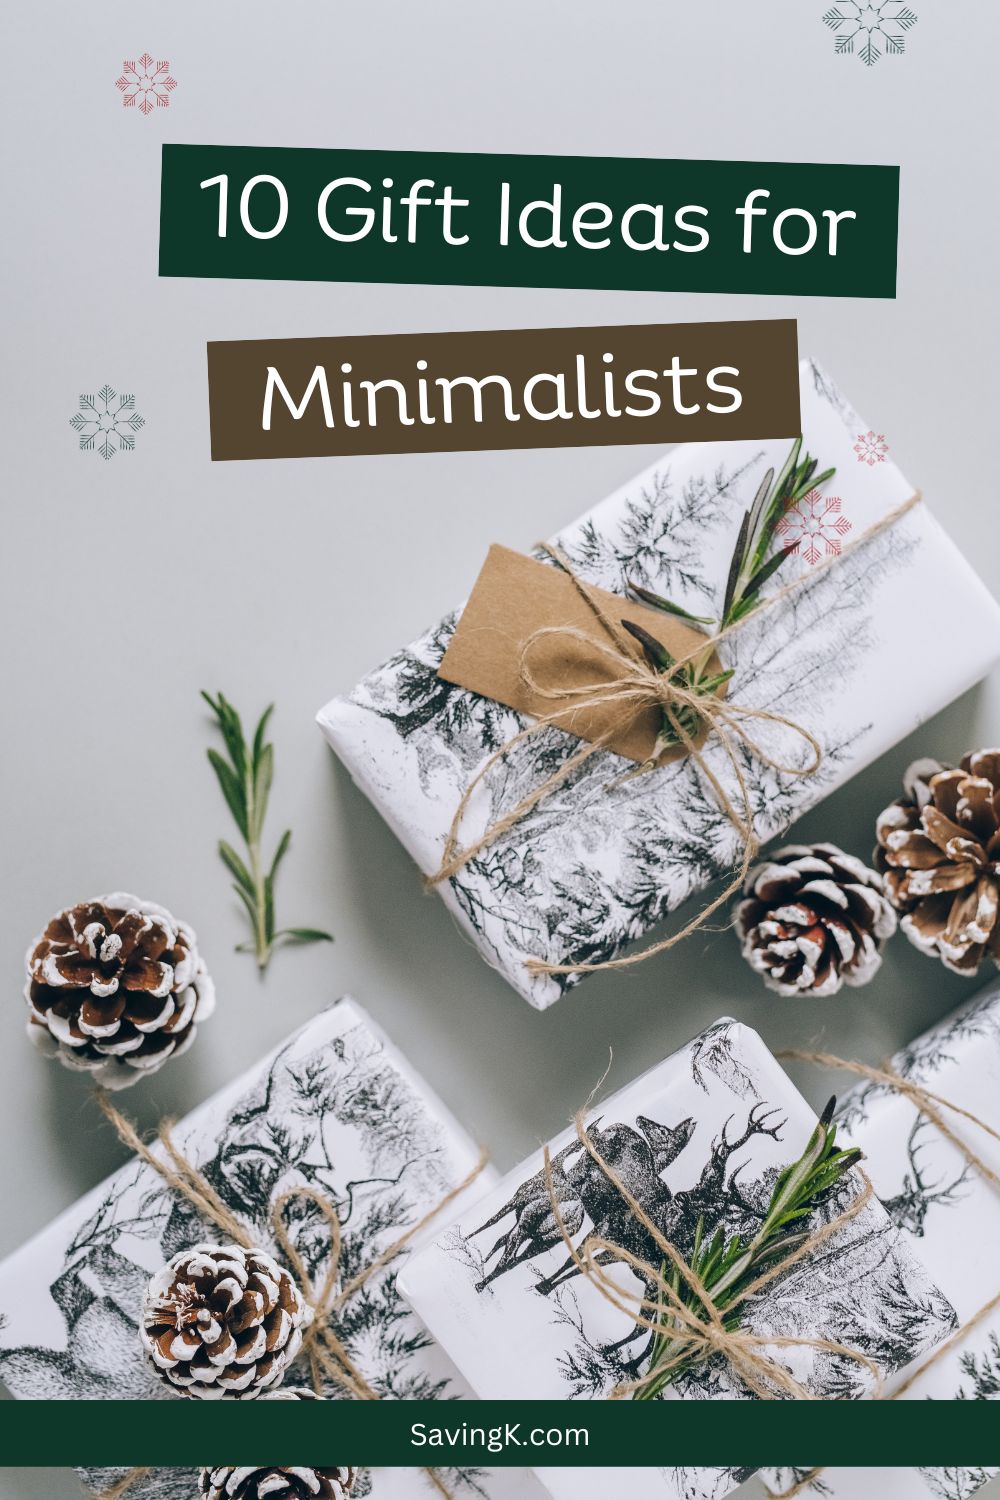 10 Gift Ideas for Minimalists